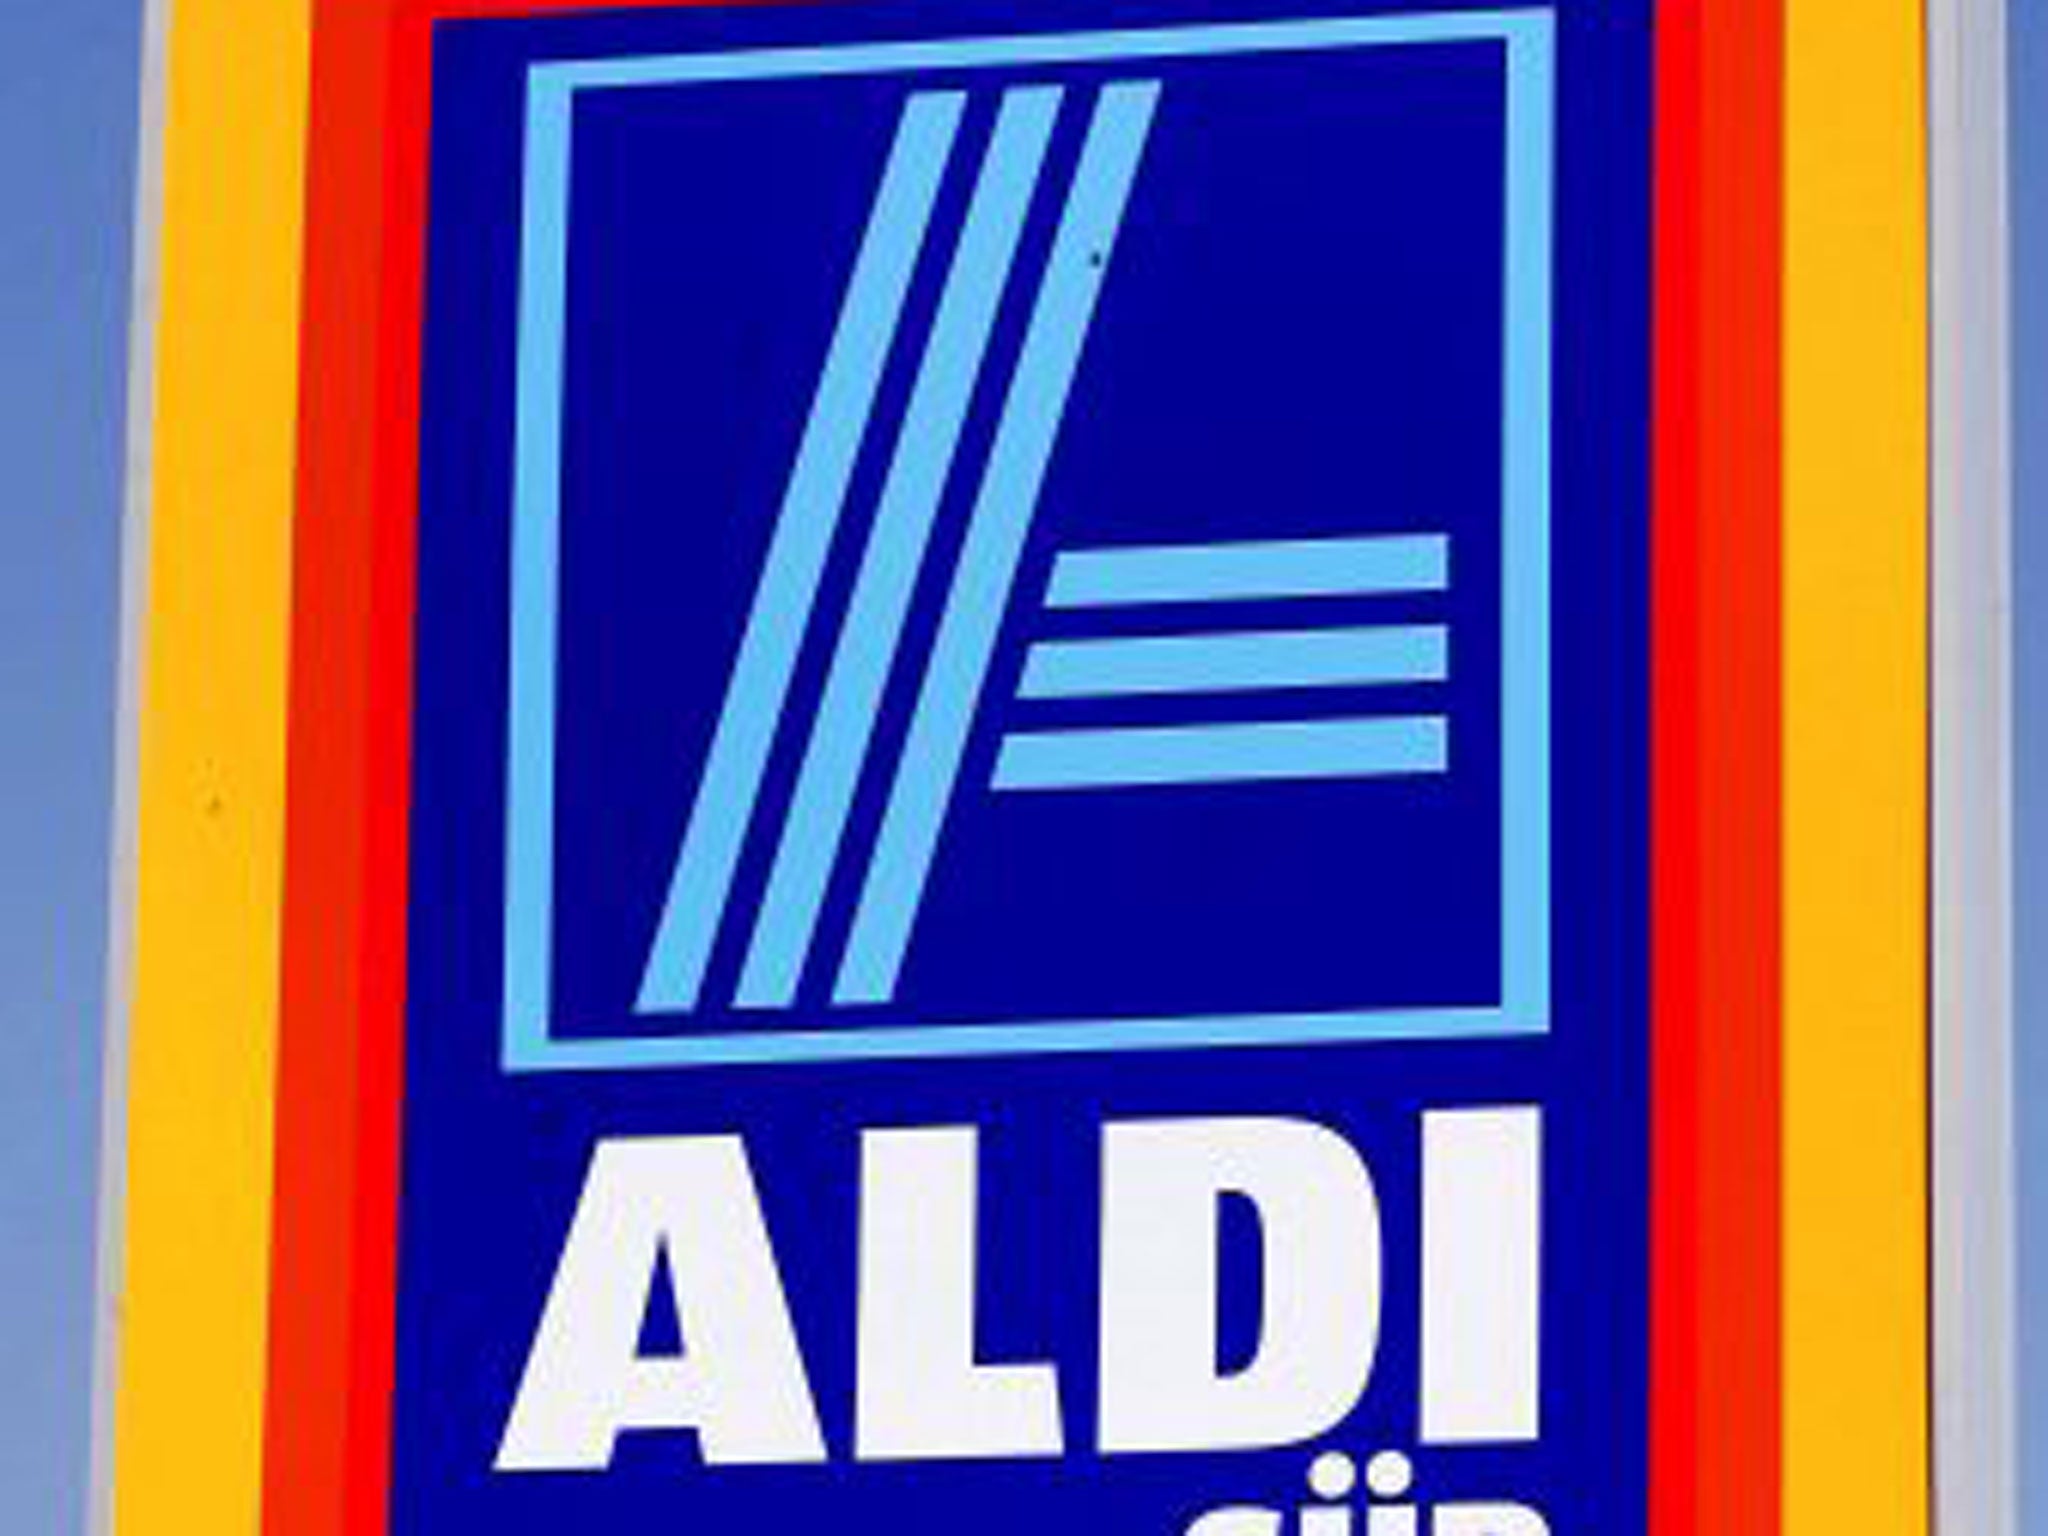 A private detective who worked for the German discount supermarket chain Aldi has accused it of using Stasi-style surveillance tactics – including hidden cameras – to spy on staff and gather information that could be used against them